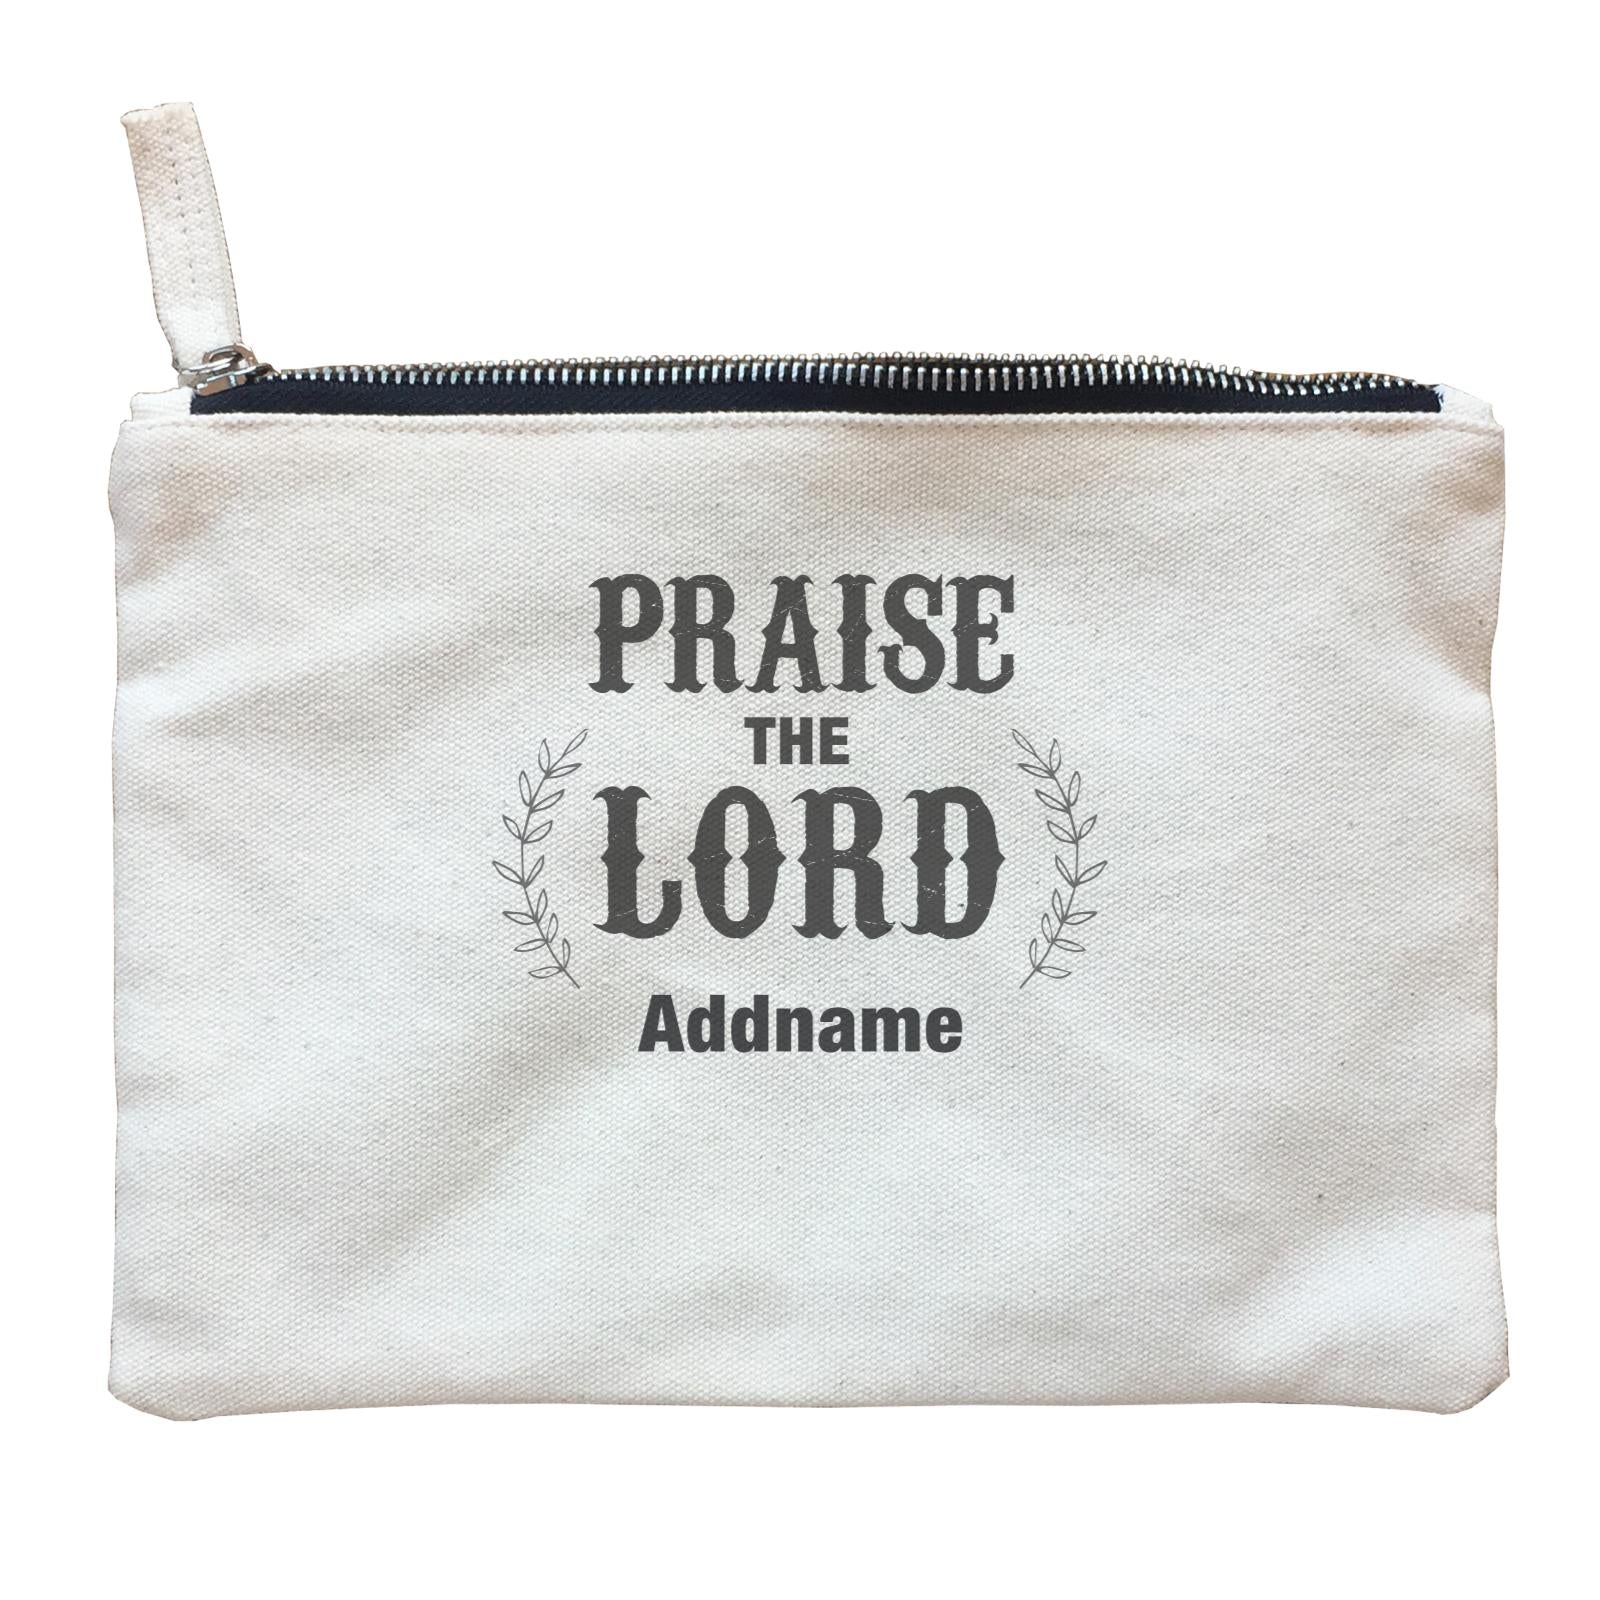 Christian Series Praise The Lord Addname Zipper Pouch